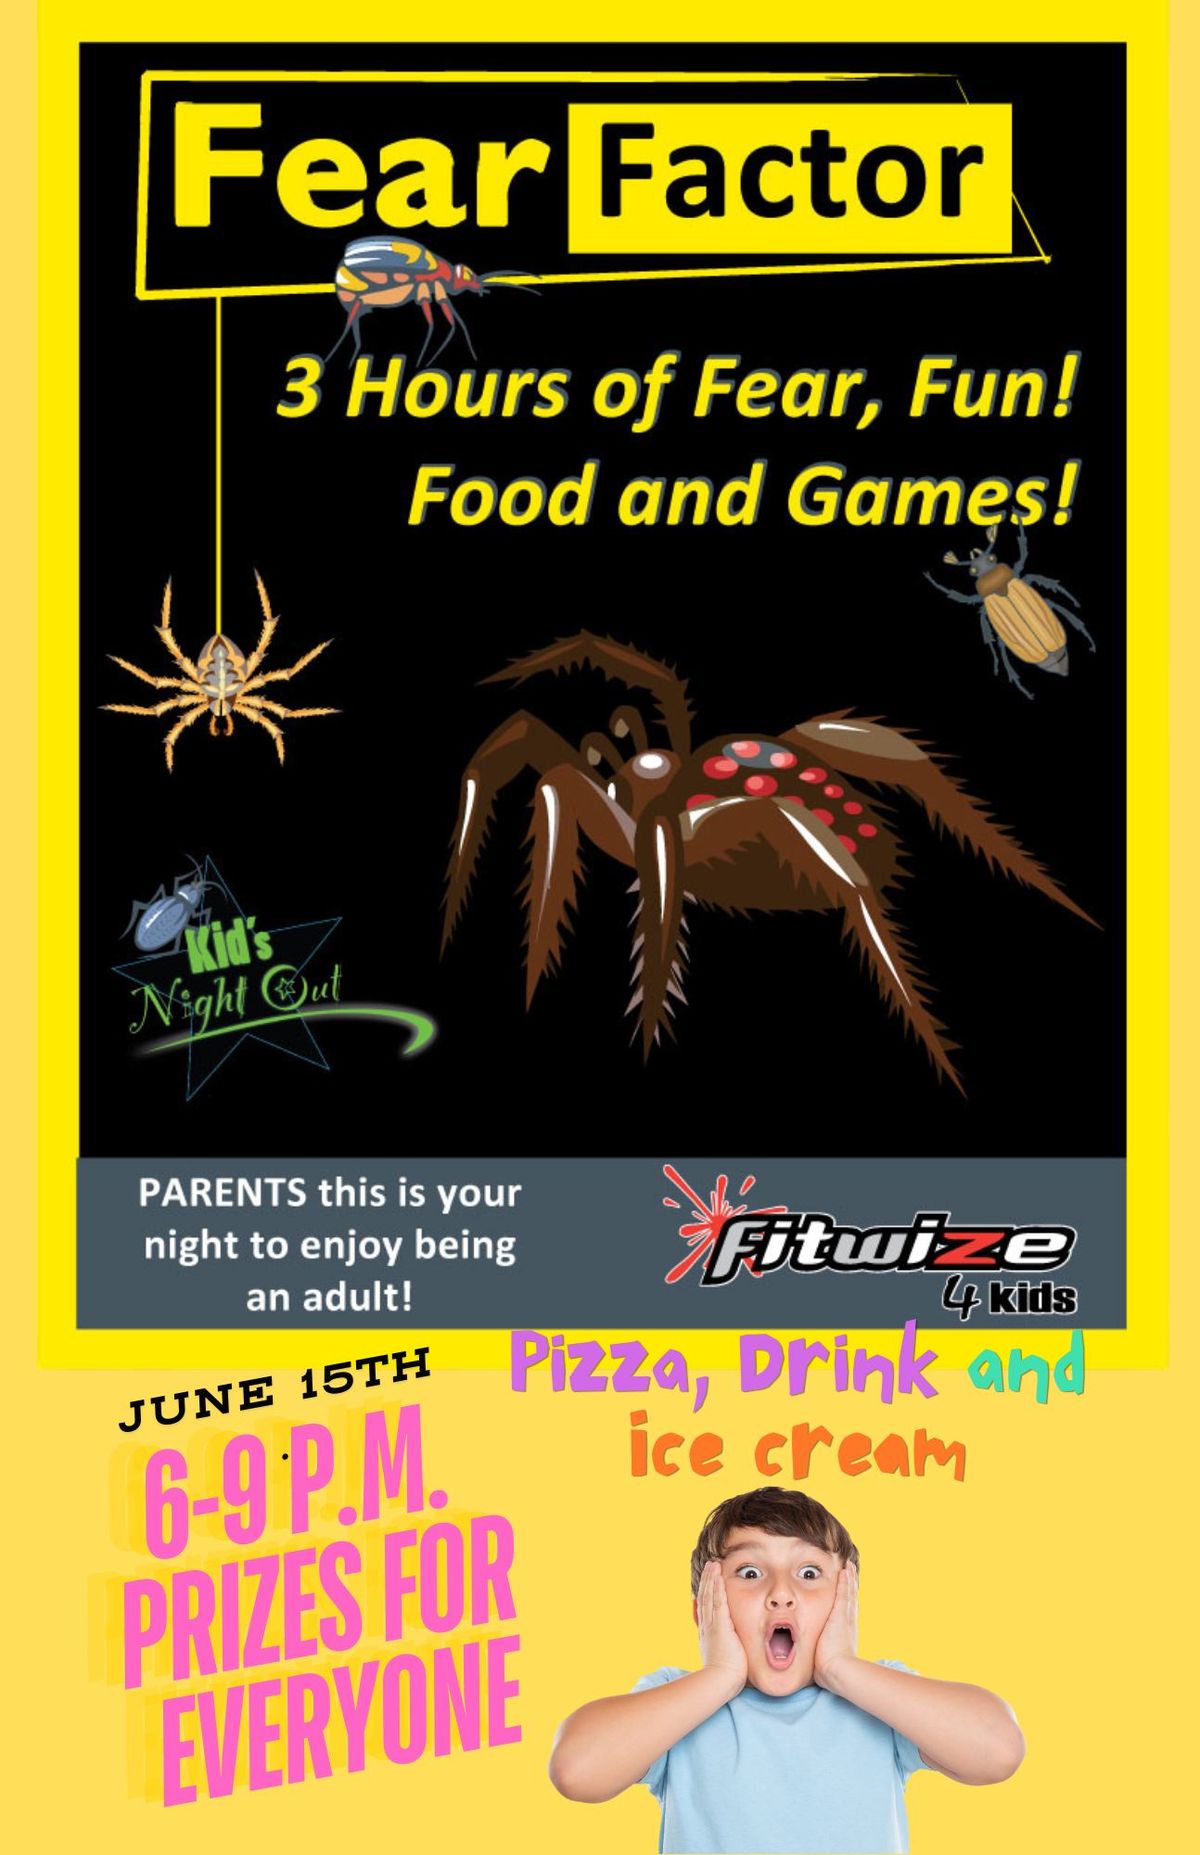 FEAR FACTOR KIDS' NIGHT OUT